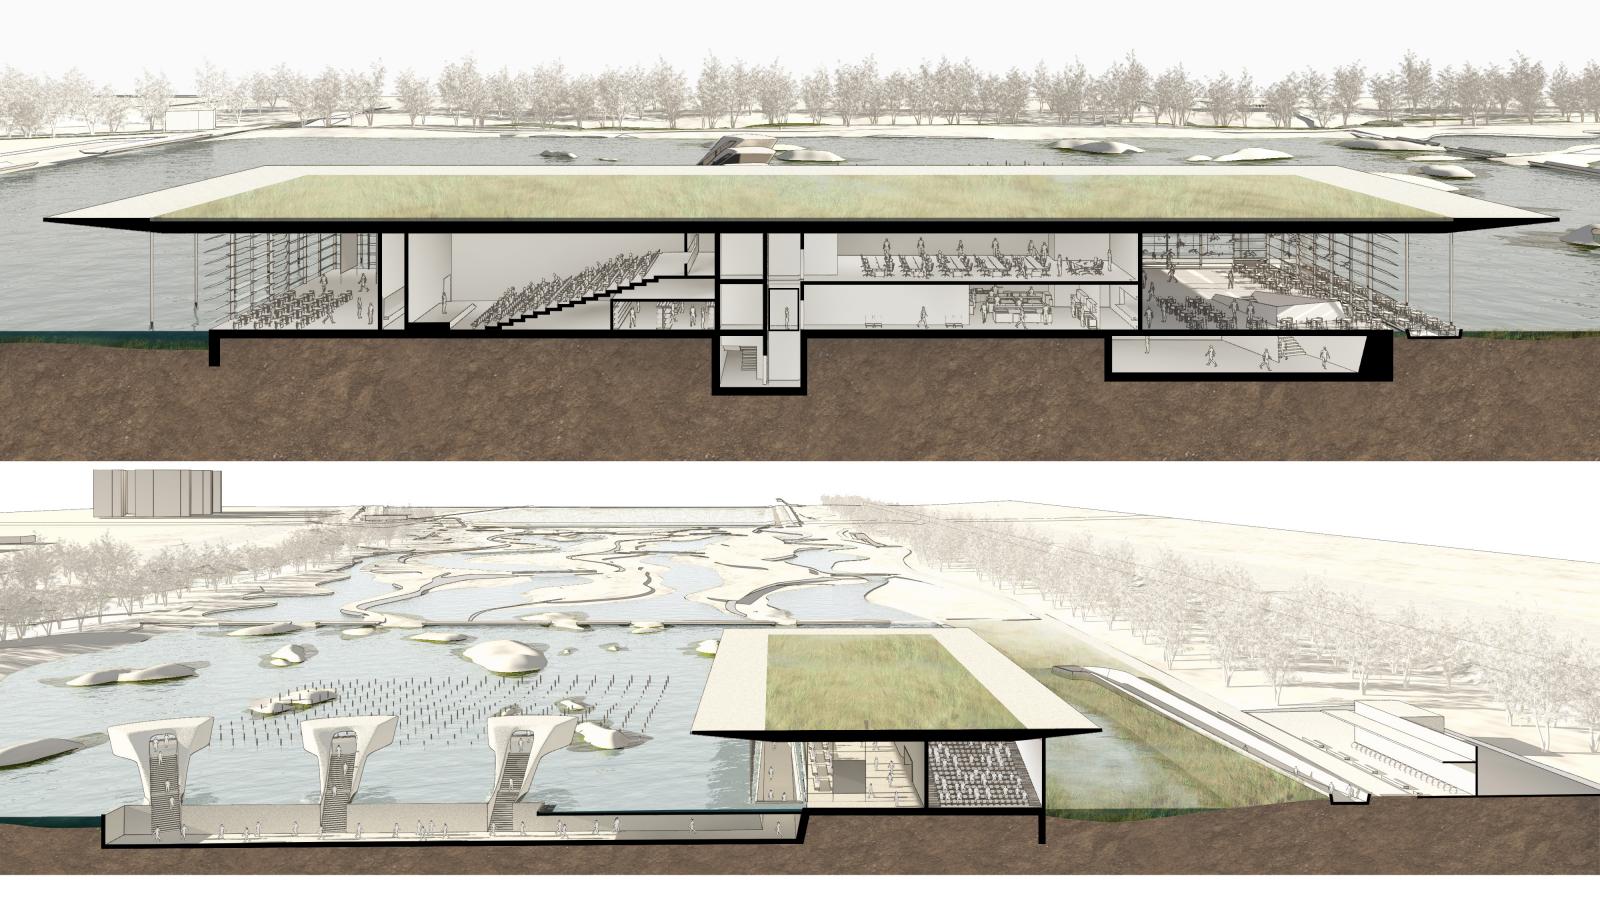 A split-view architectural rendering of a building with a flat, green roof set in a landscaped area surrounded by water at Lingang. The cross-section below shows multiple levels, including open spaces, staircases, and seating areas. Trees and pathways are visible in the background along with bird icons denoting nearby habitats.